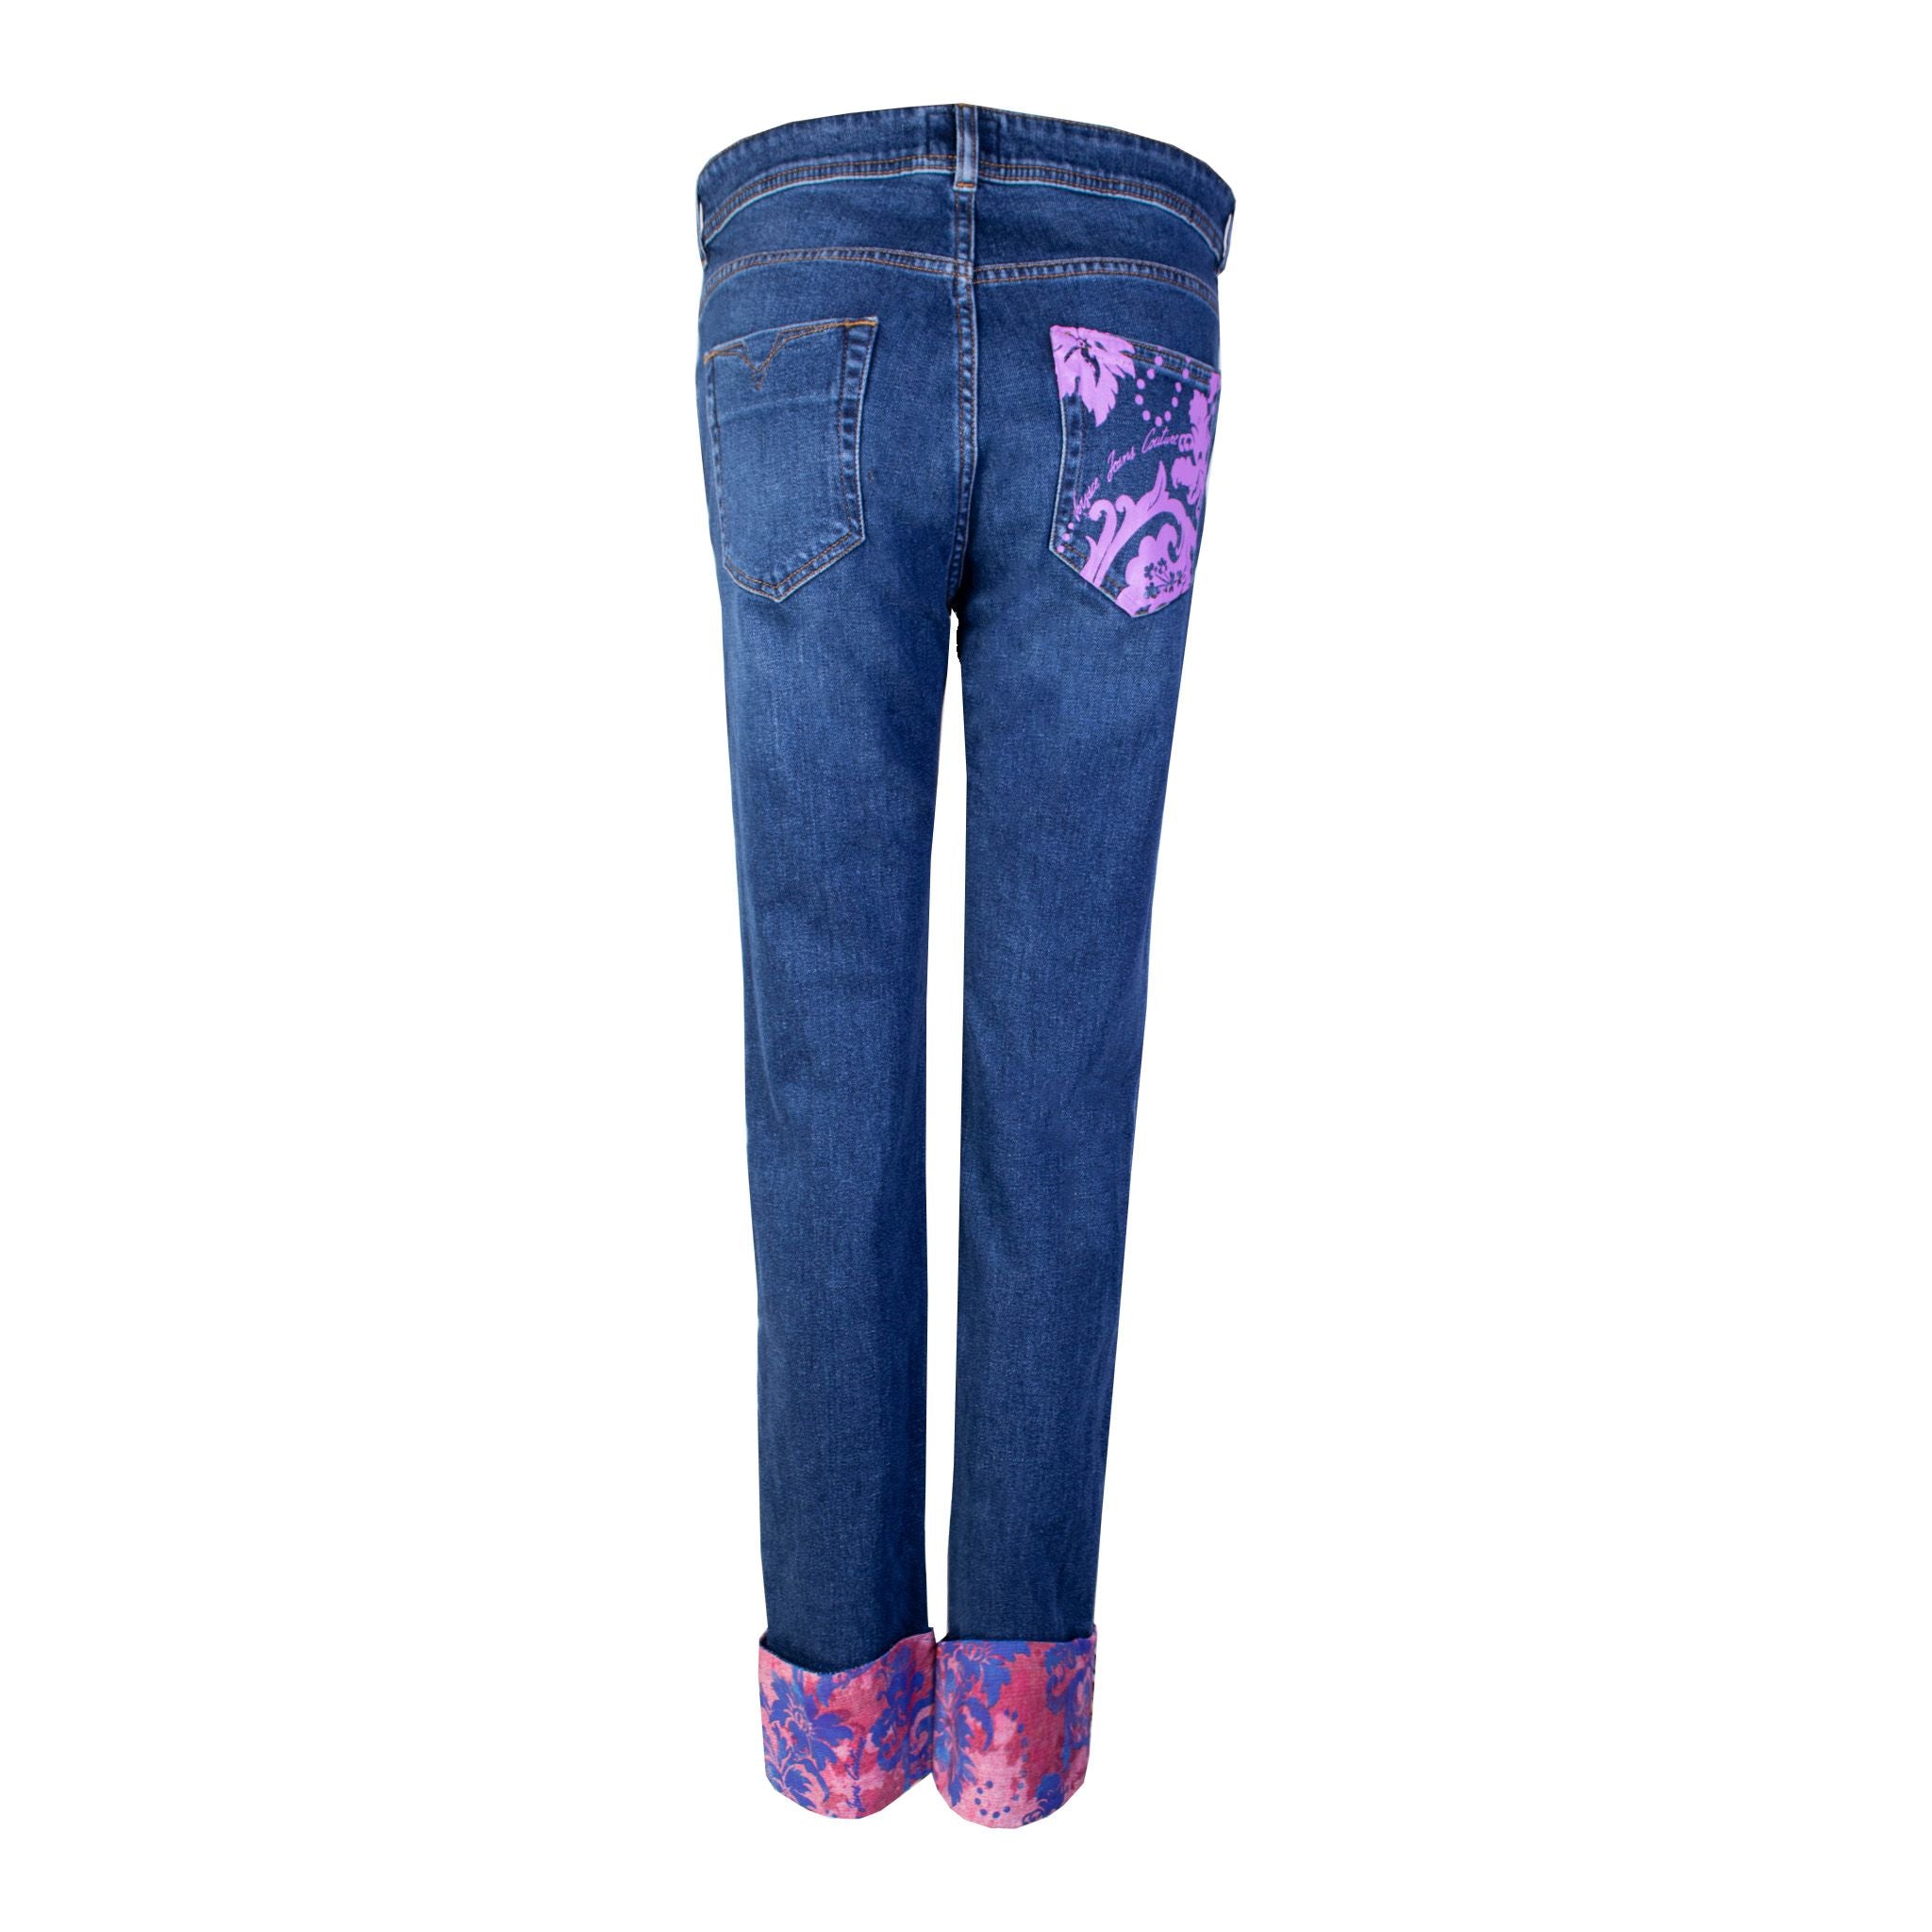 Chic Cuffed Denim Pants with Printed Details